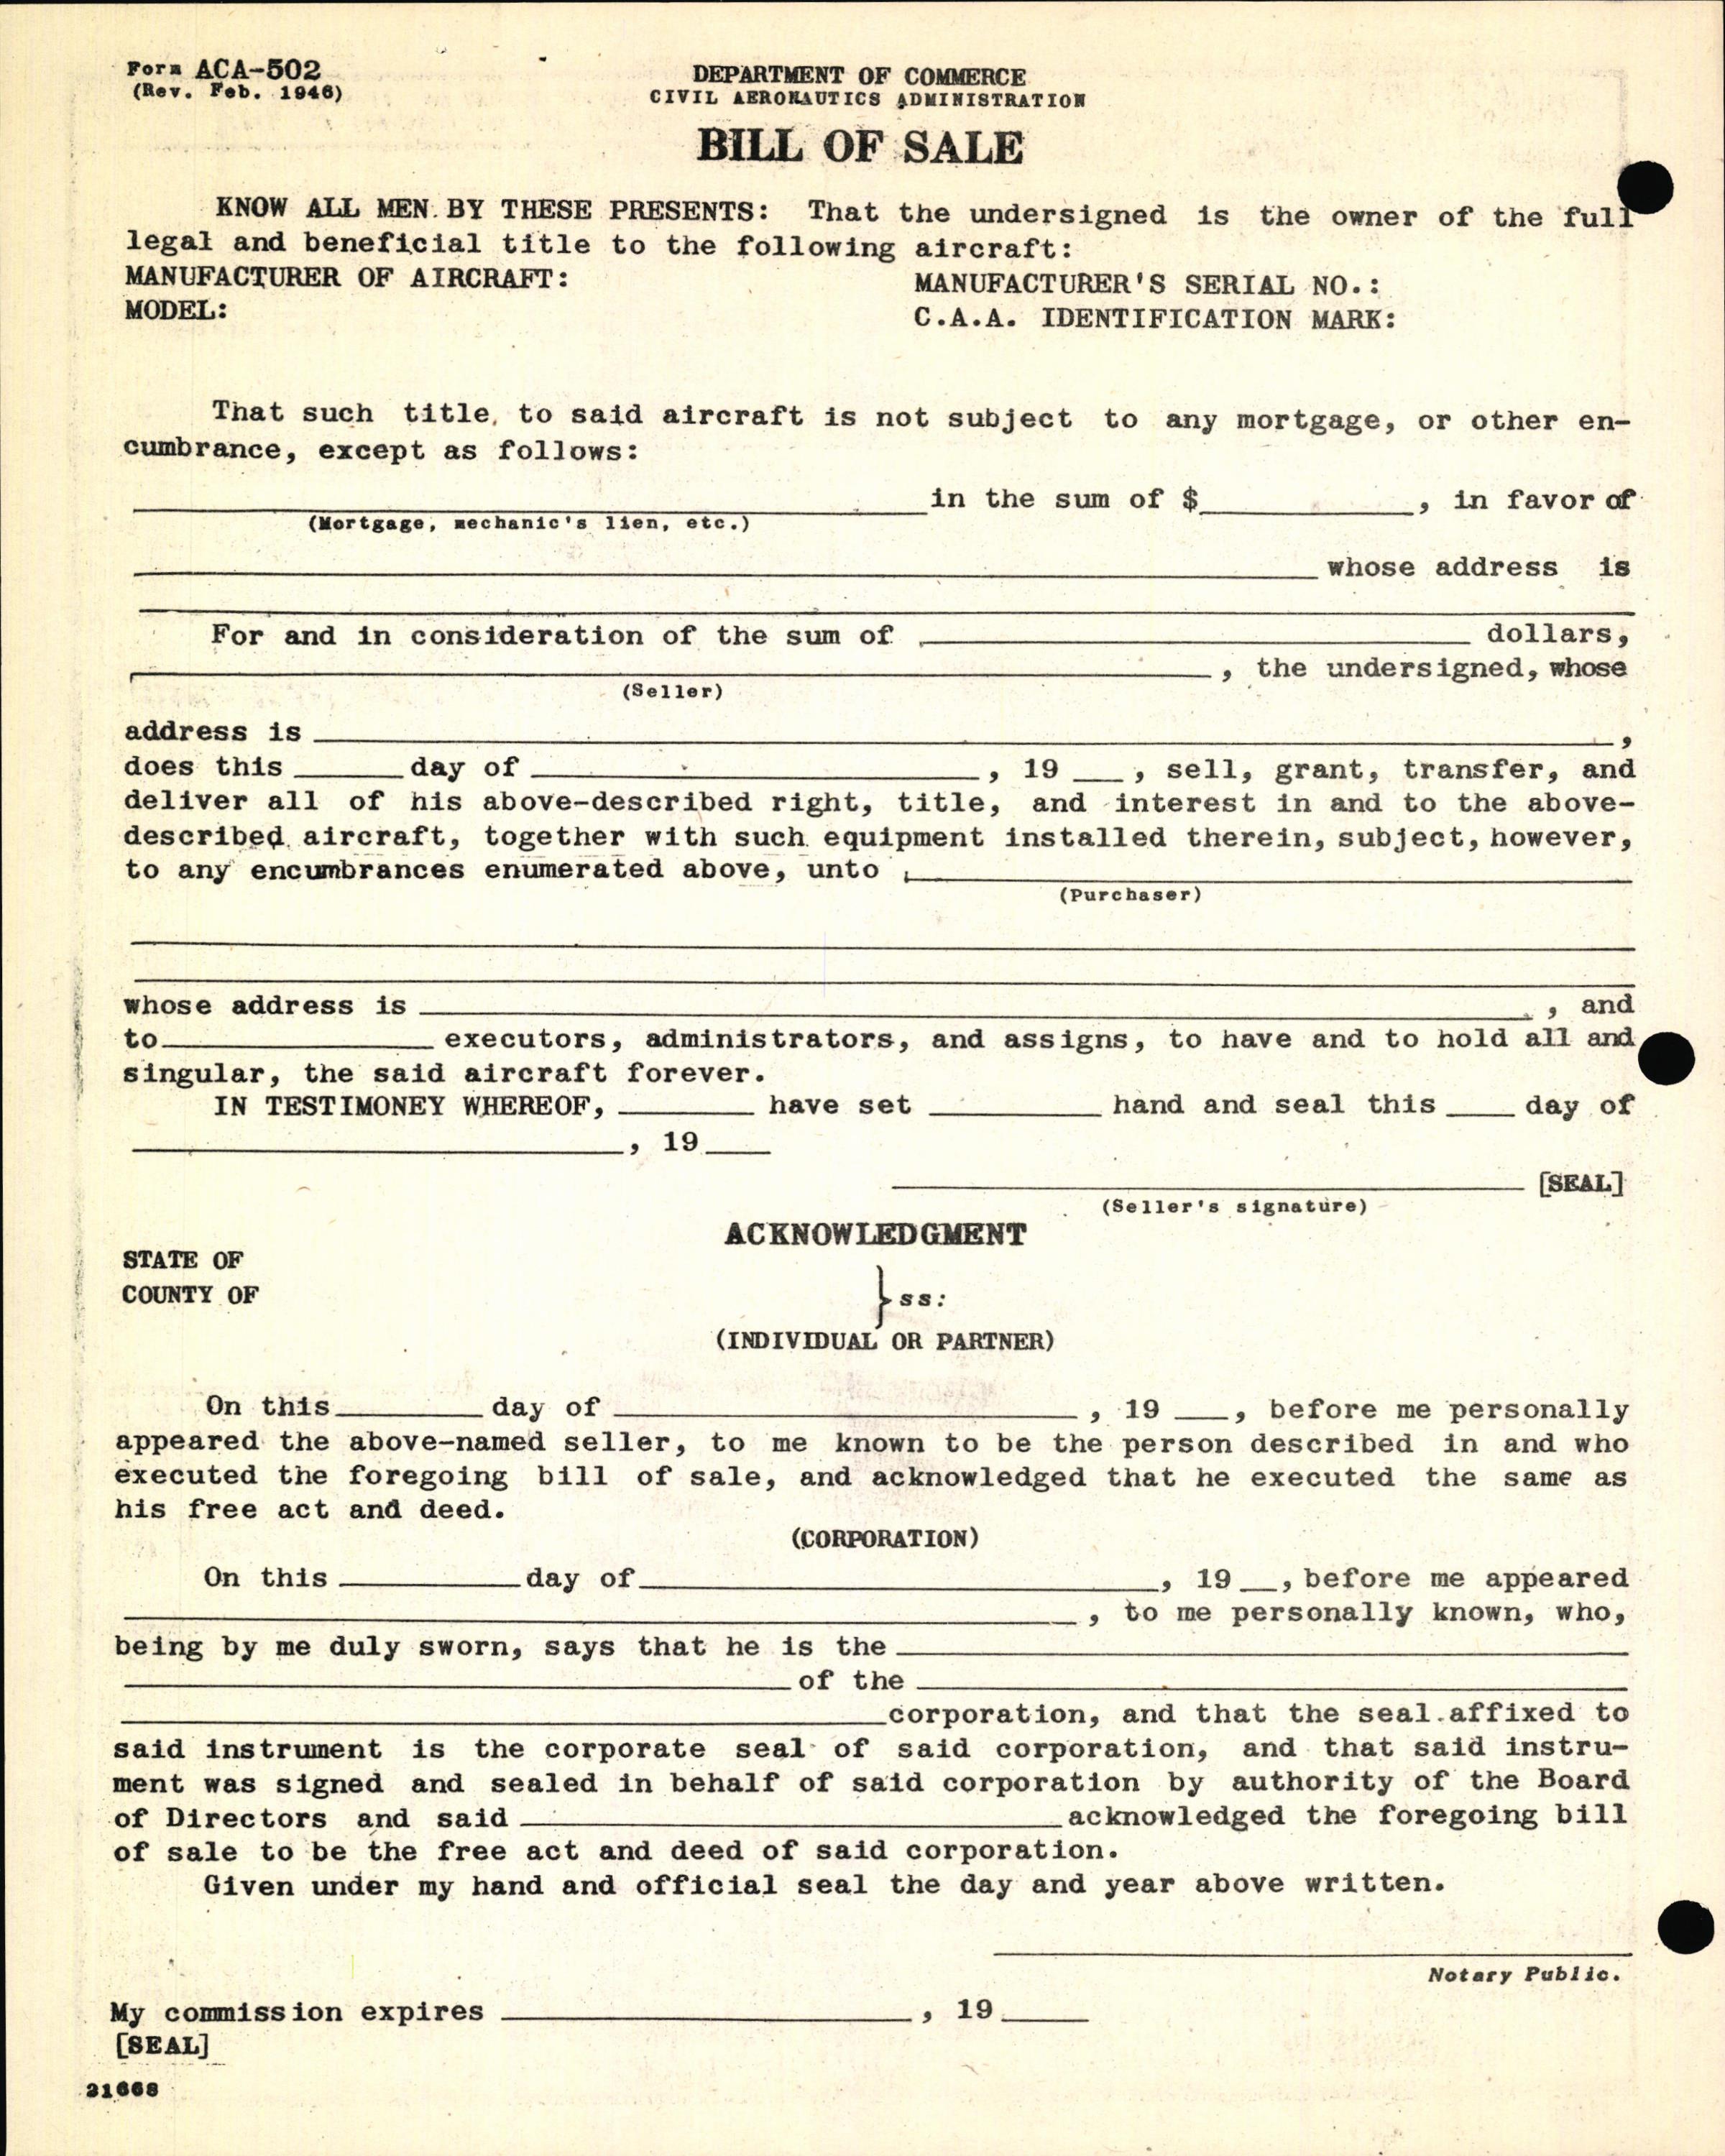 Sample page 8 from AirCorps Library document: Technical Information for Serial Number 1270